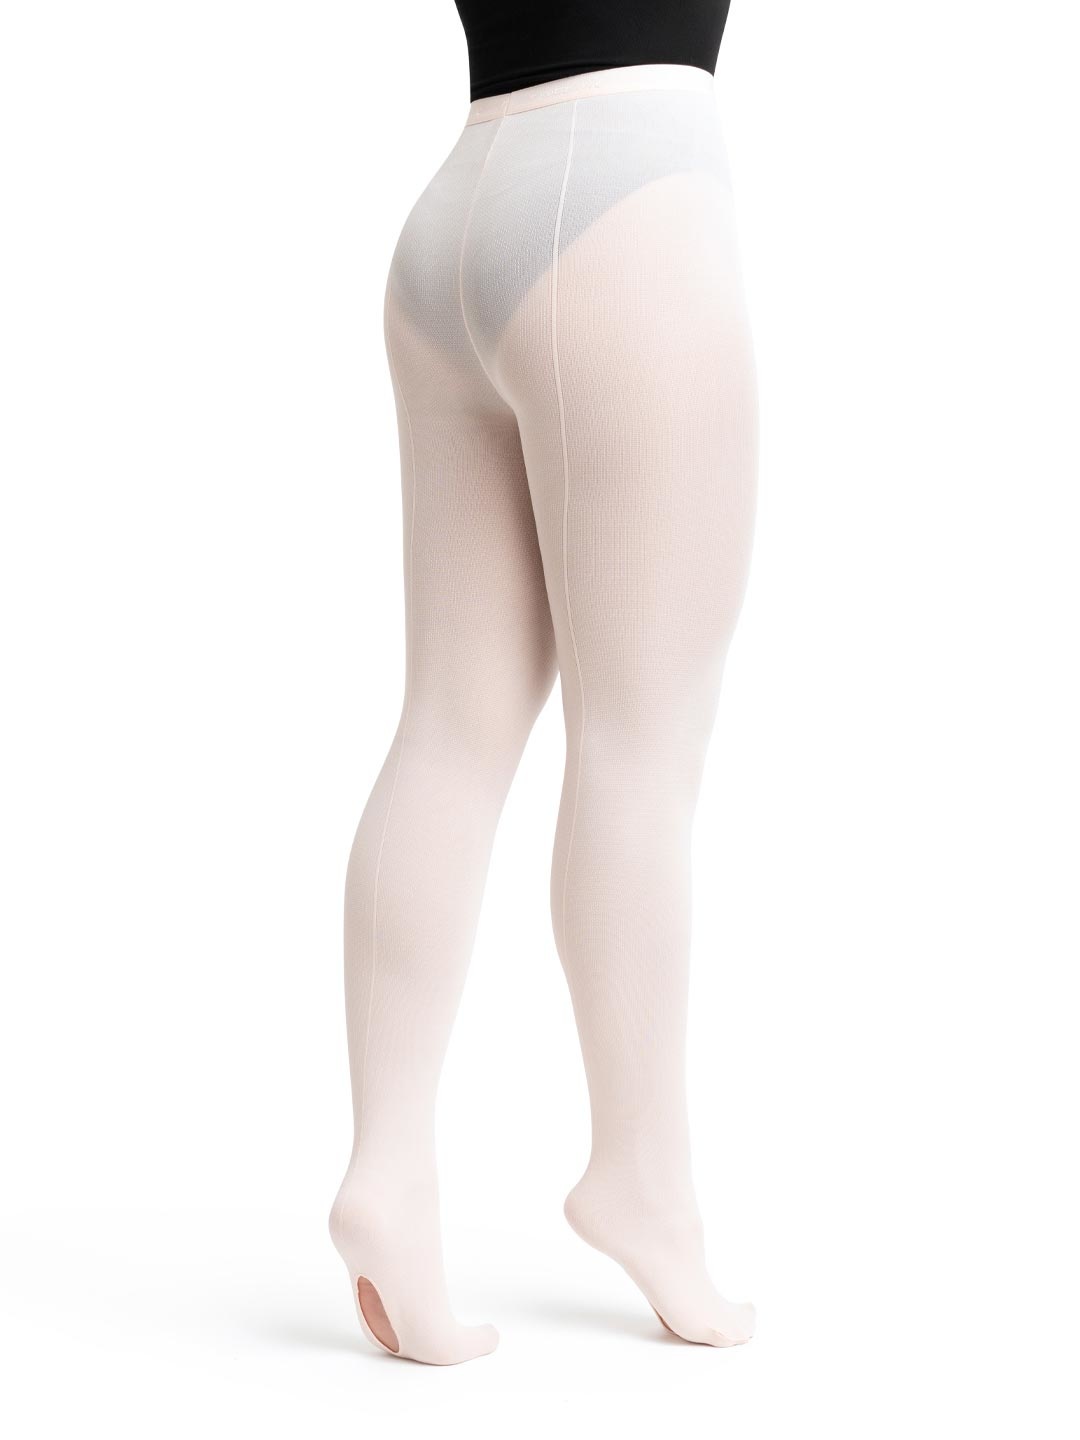 CZ Prof Mesh Transition Seam Tights -Youth - Bellissimo